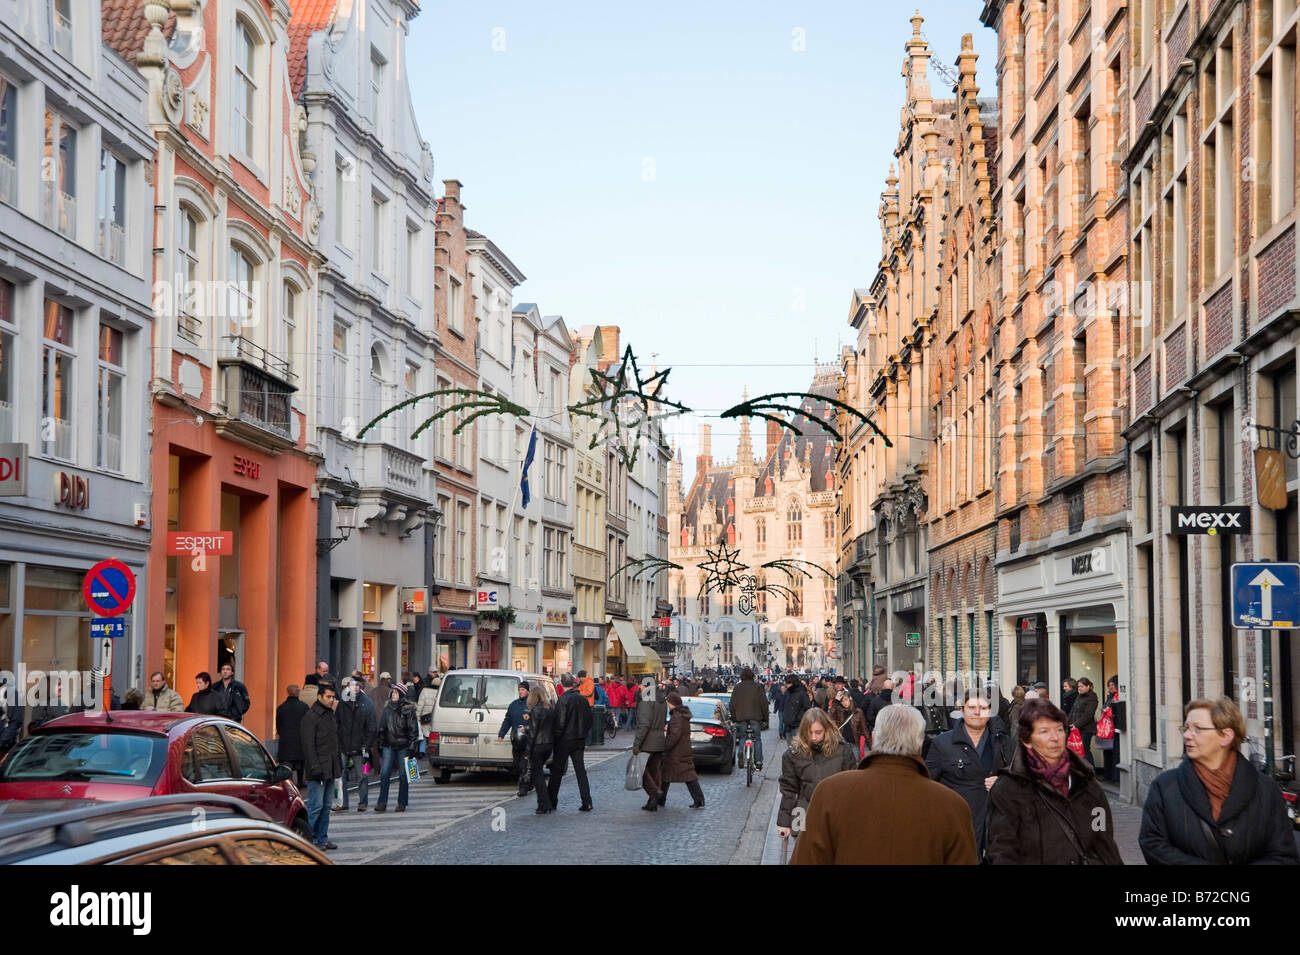 Shopping on Steenstraat in the old town centre at Christmas time, Bruges, Belgium Stock Photo